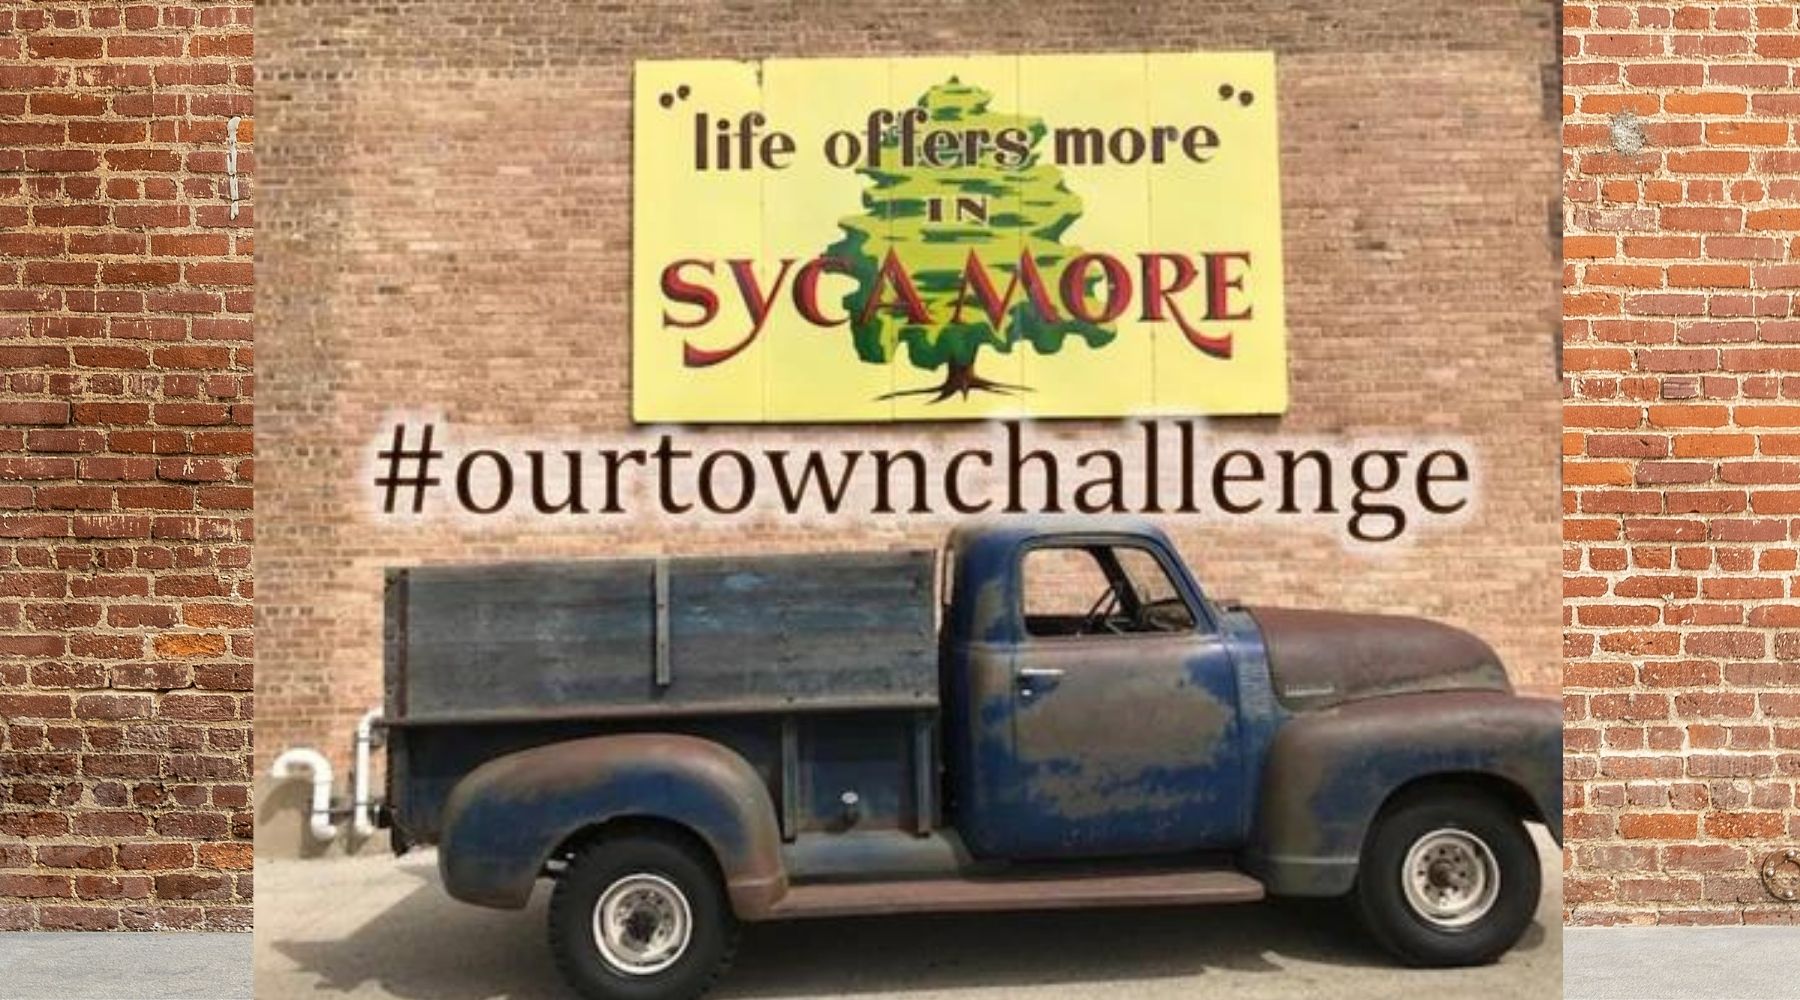 Our Town Challenge